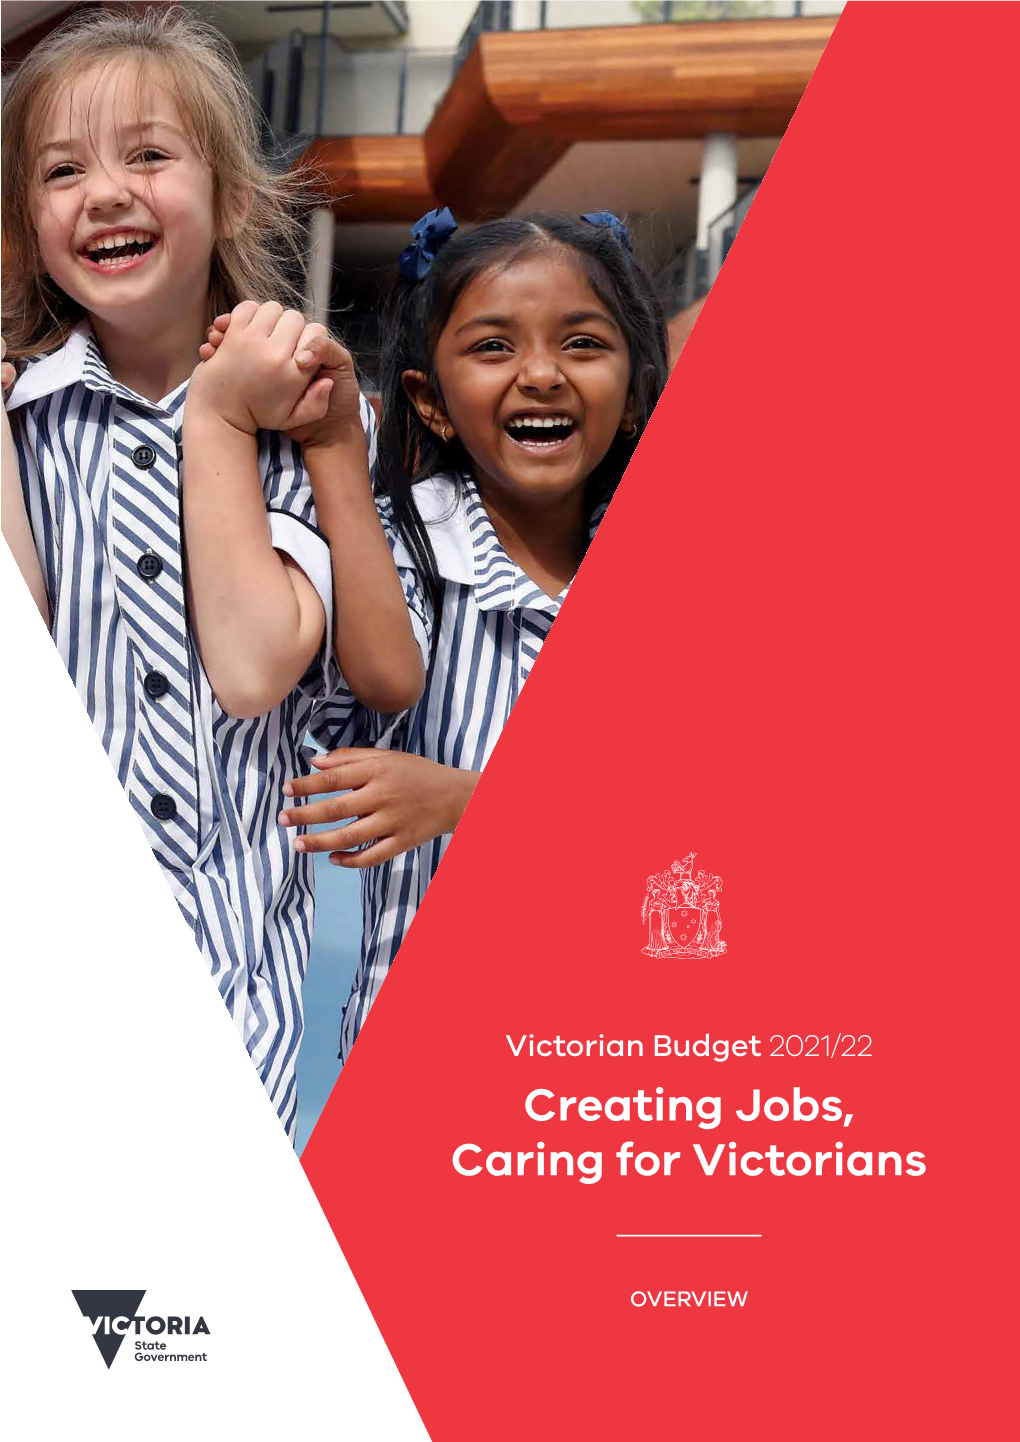 Victorian Budget 2021/22 Creating Jobs, Caring for Victorians